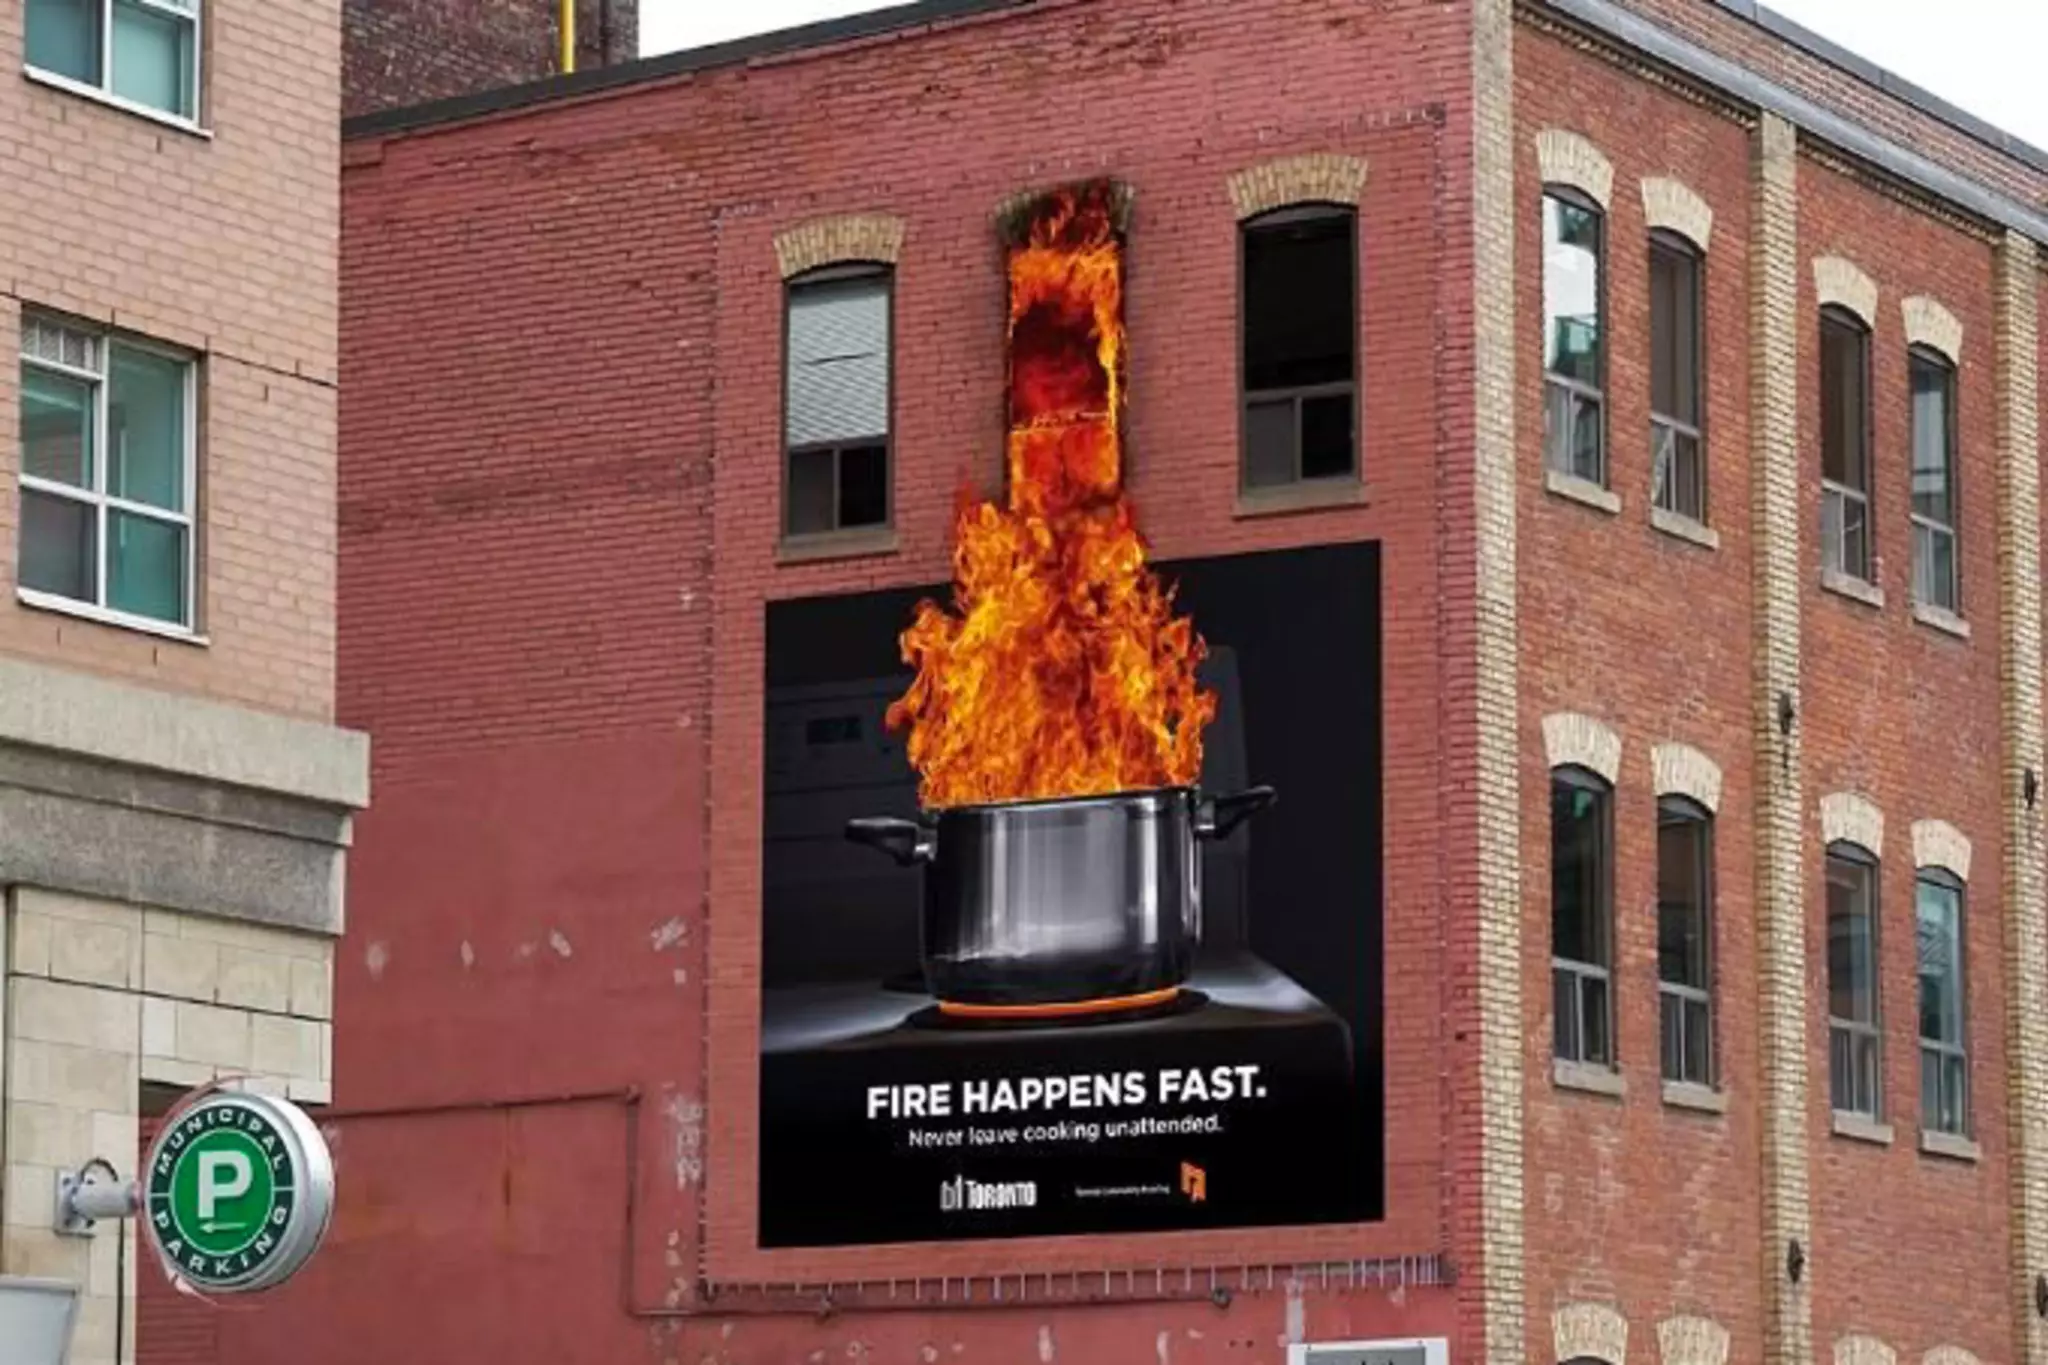 realism in advertising design - fire happens fast